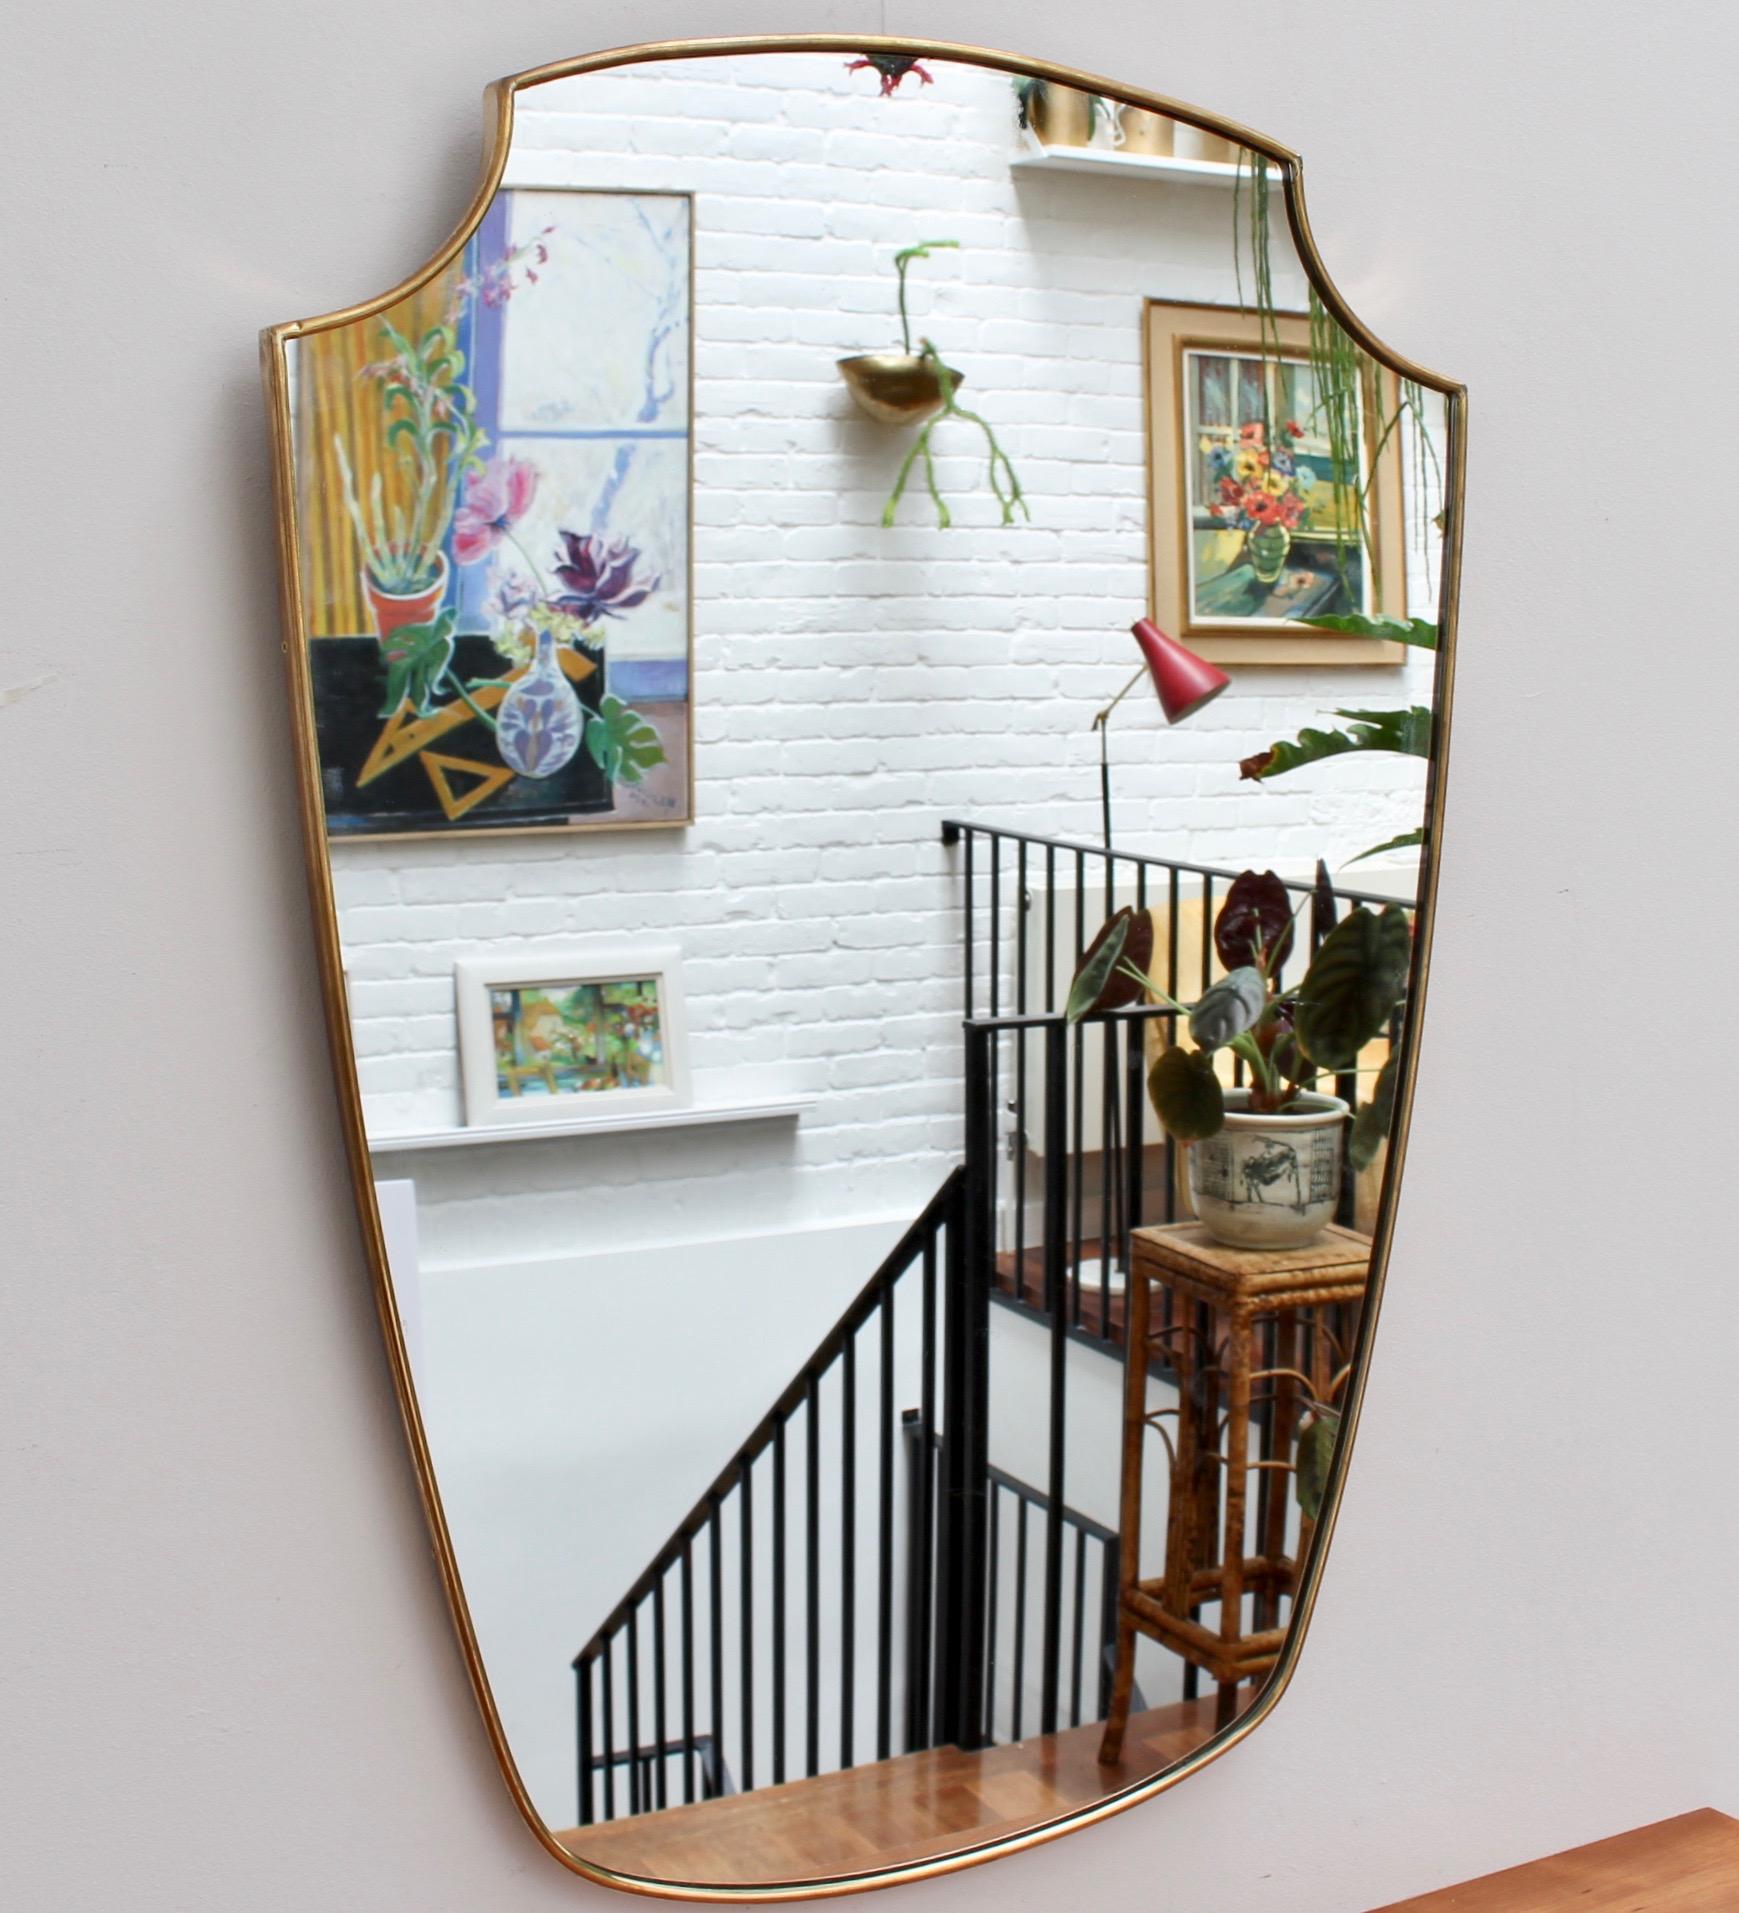 Midcentury Italian wall mirror with brass frame (circa 1950s). This mirror is simply elegant and characterful in a modern Gio Ponti style. It is crest-shaped and in good vintage condition. There is a characterful, aged patina on the brass frame